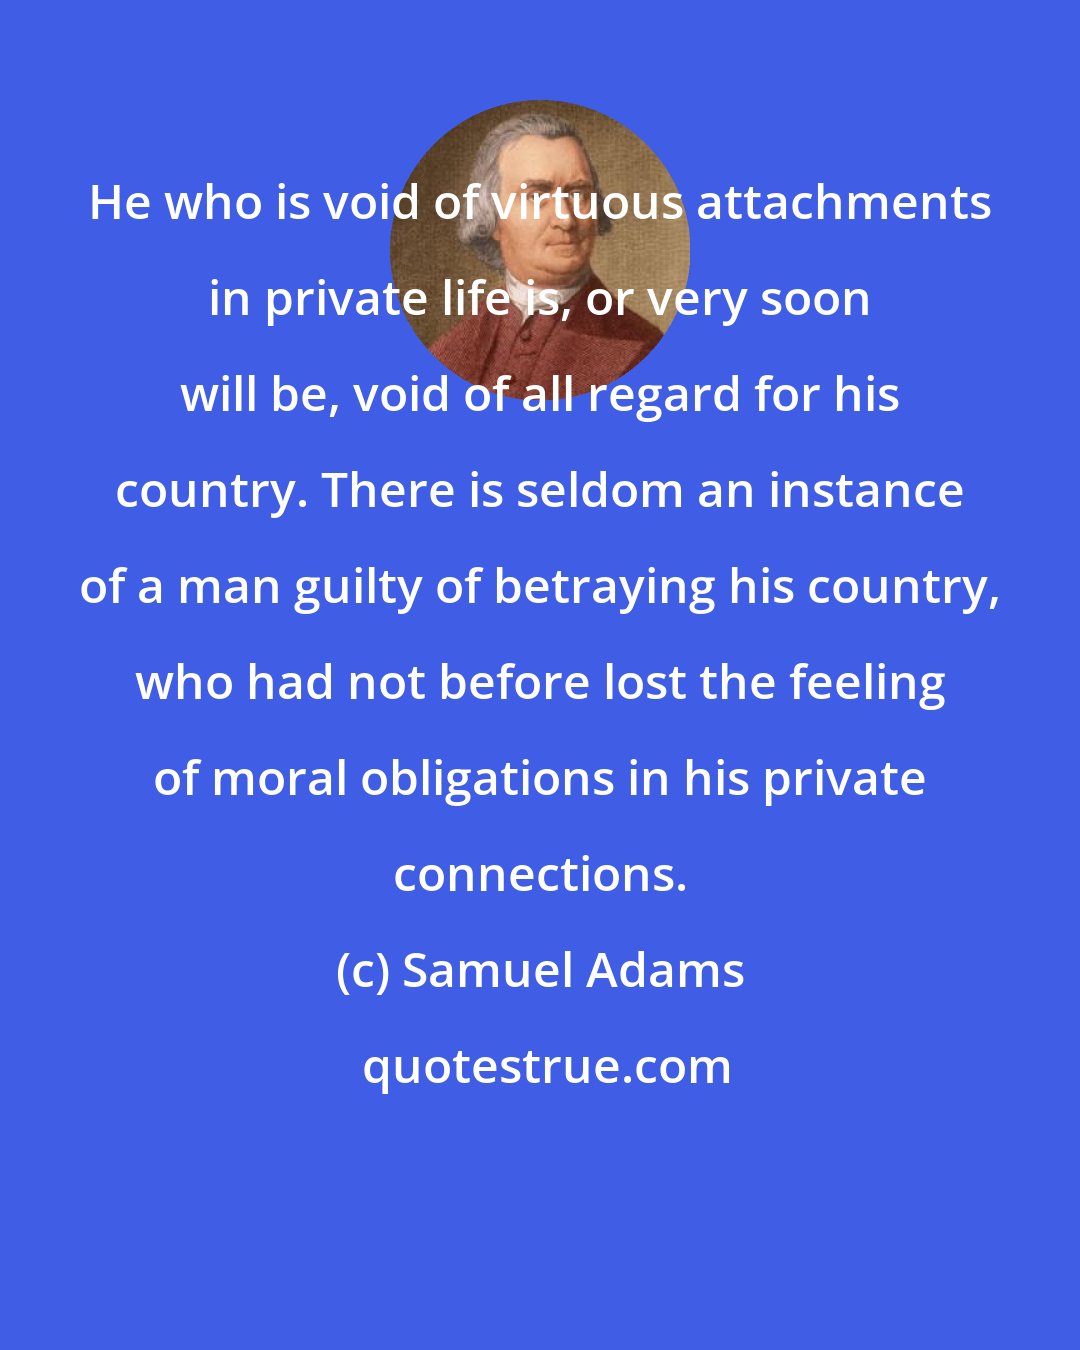 Samuel Adams: He who is void of virtuous attachments in private life is, or very soon will be, void of all regard for his country. There is seldom an instance of a man guilty of betraying his country, who had not before lost the feeling of moral obligations in his private connections.